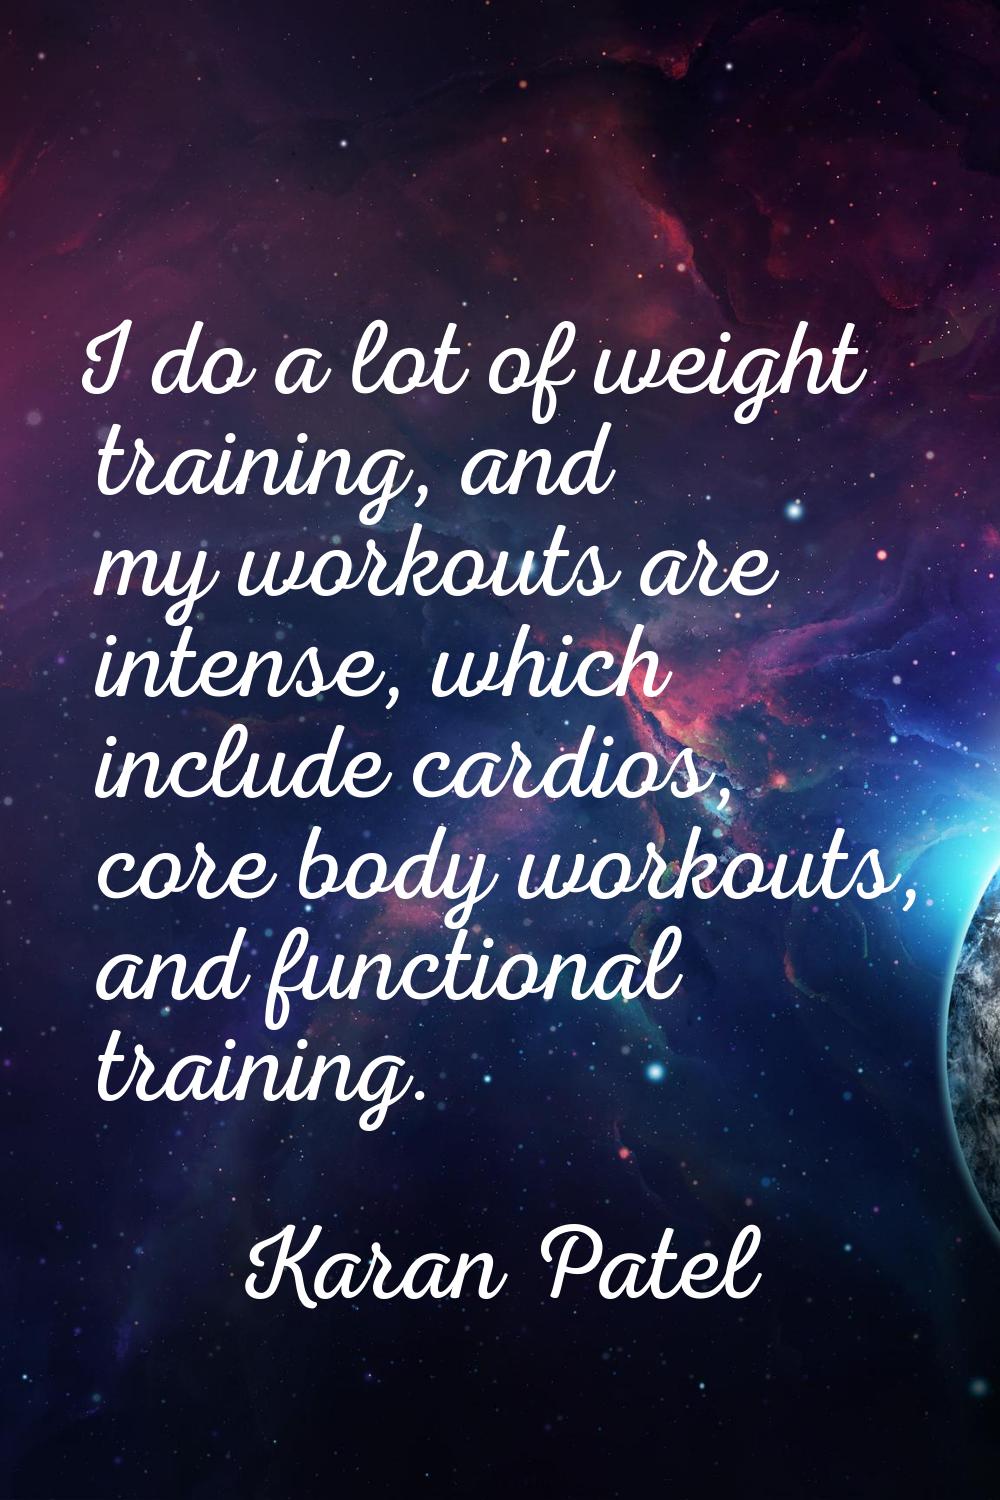 I do a lot of weight training, and my workouts are intense, which include cardios, core body workou